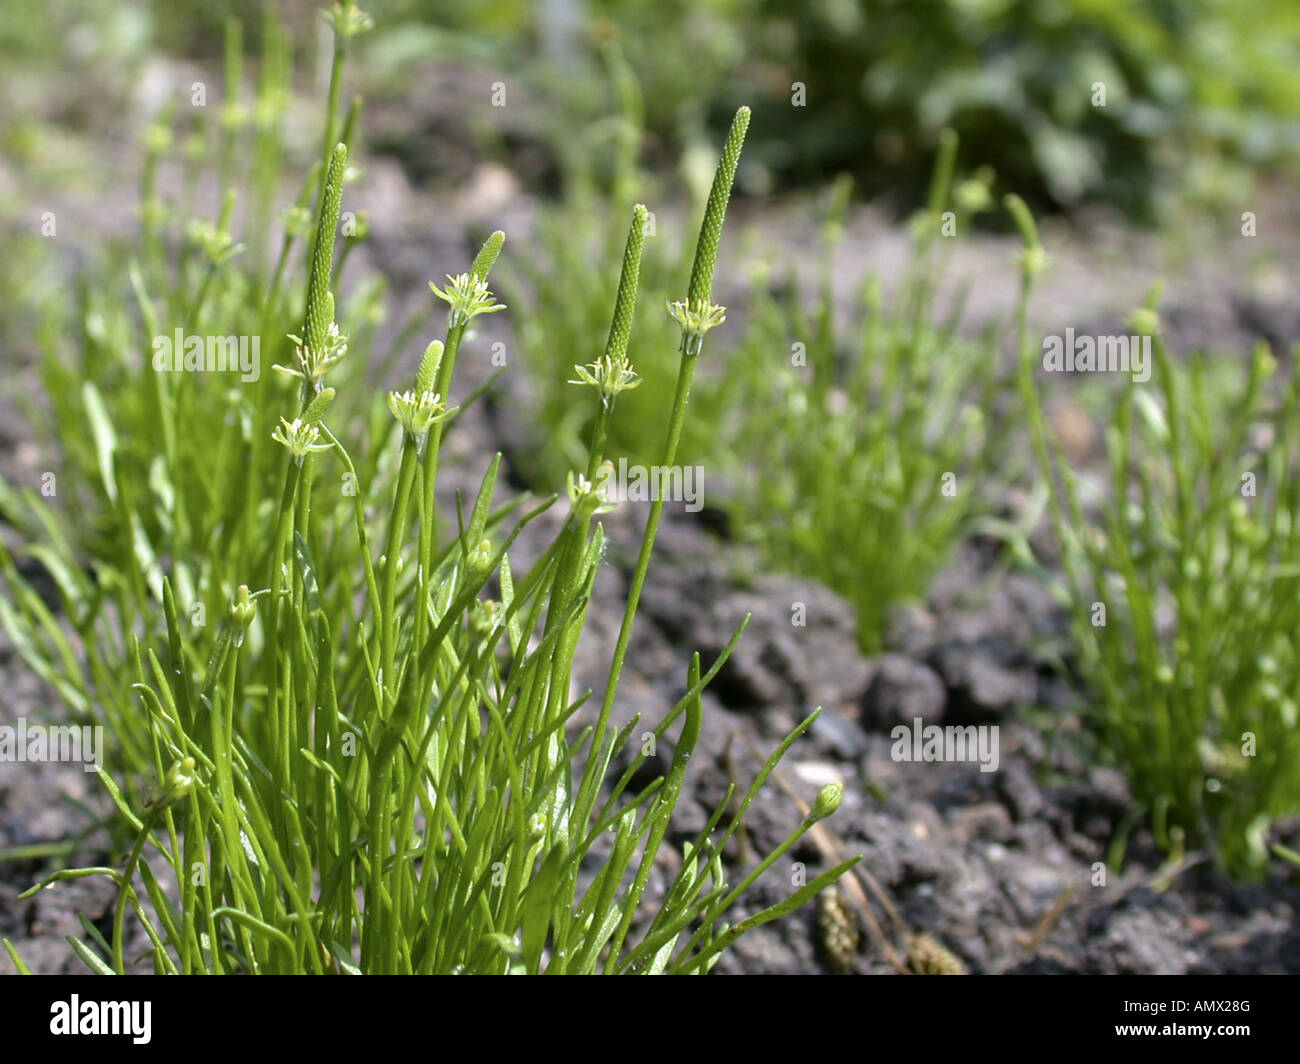 mousetail, common mouse-tail, least mouse-tail, tiny mouse-tail (Myosurus minimus), blooming plants Stock Photo